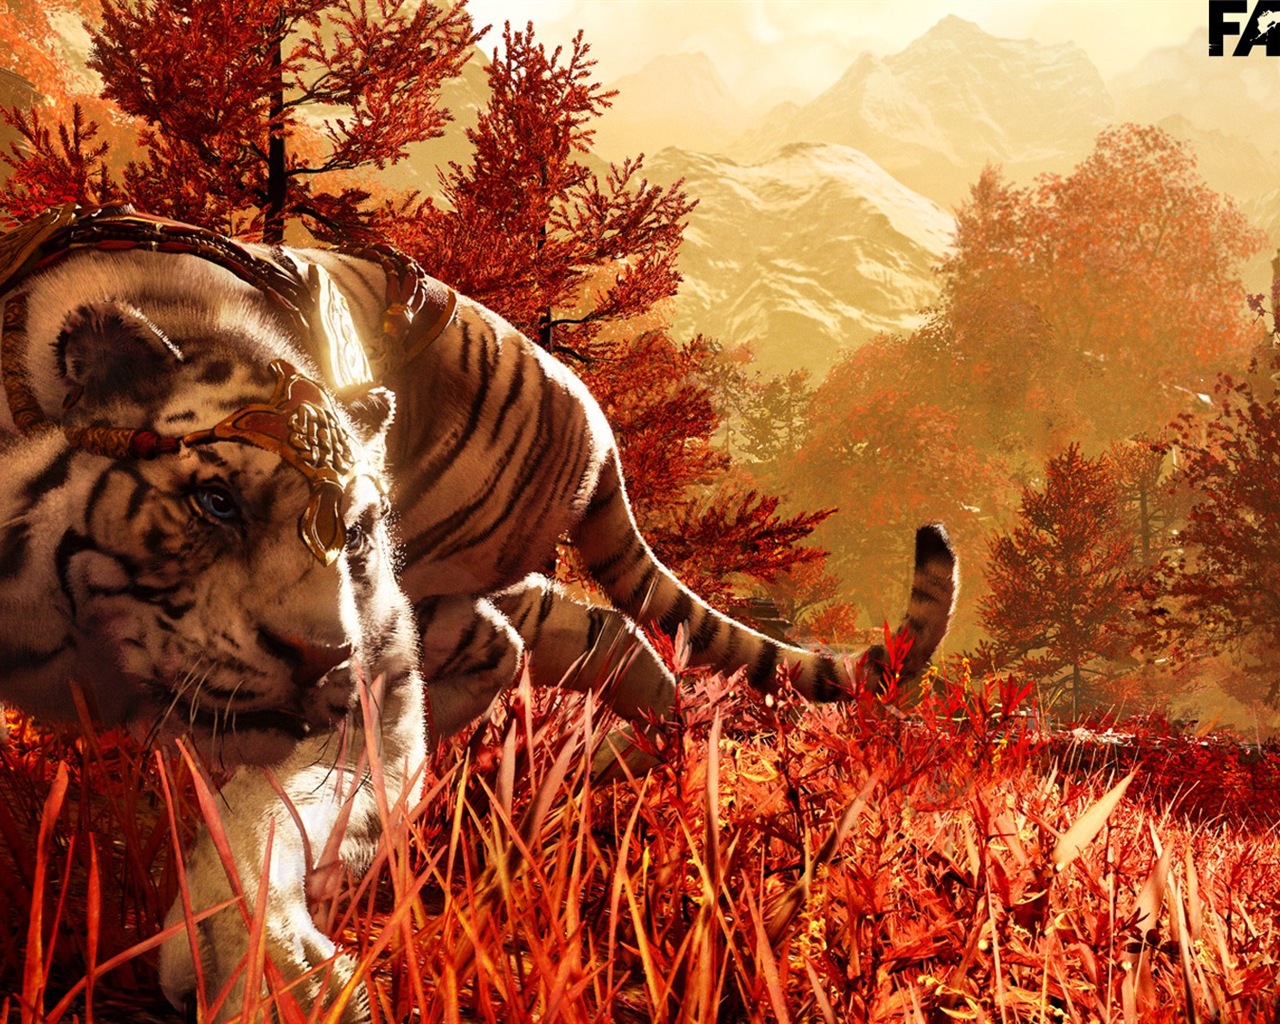 Far Cry 4 HD game wallpapers #2 - 1280x1024